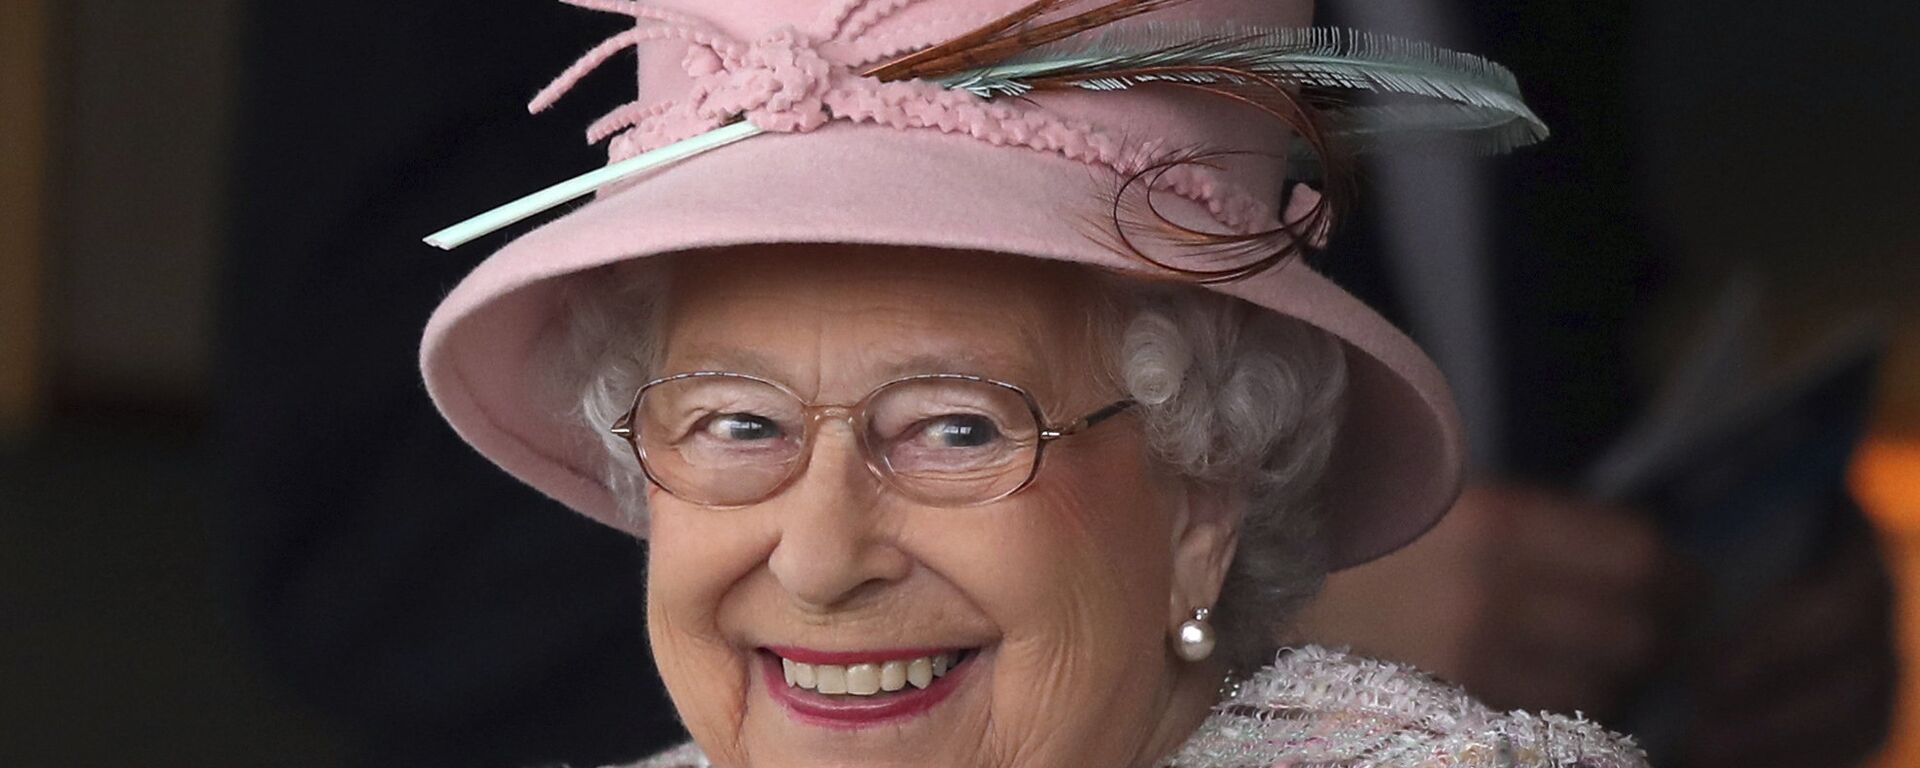 Britain's Queen Elizabeth II smiles as she attends an event at Newbury Racecourse in Newbury England, Friday April 21, 2017. - Sputnik International, 1920, 11.11.2021